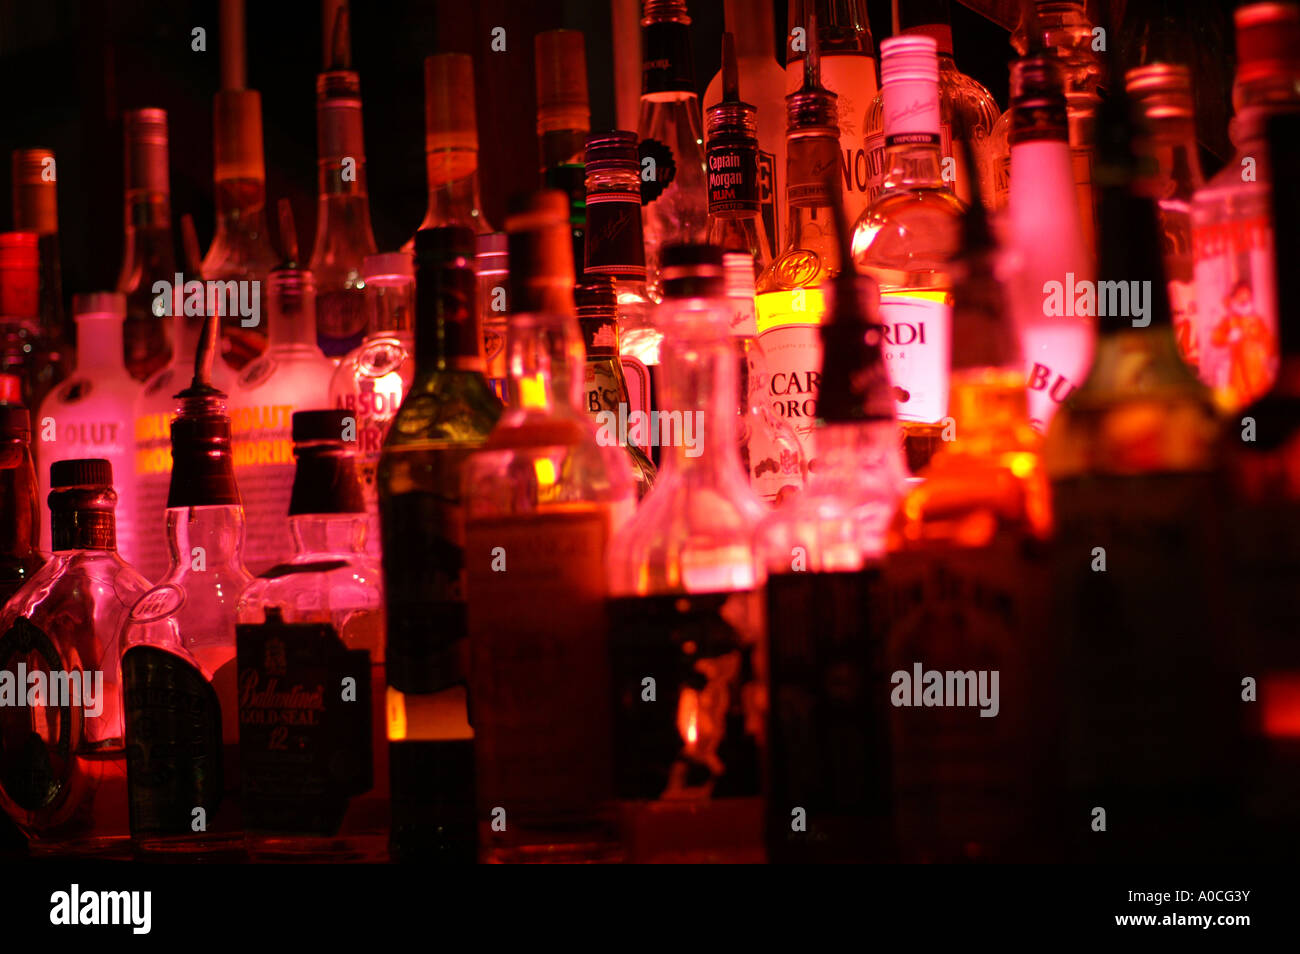 Bottles of spirits by night lit with a red lamp from a beach side bar in Dubai Stock Photo